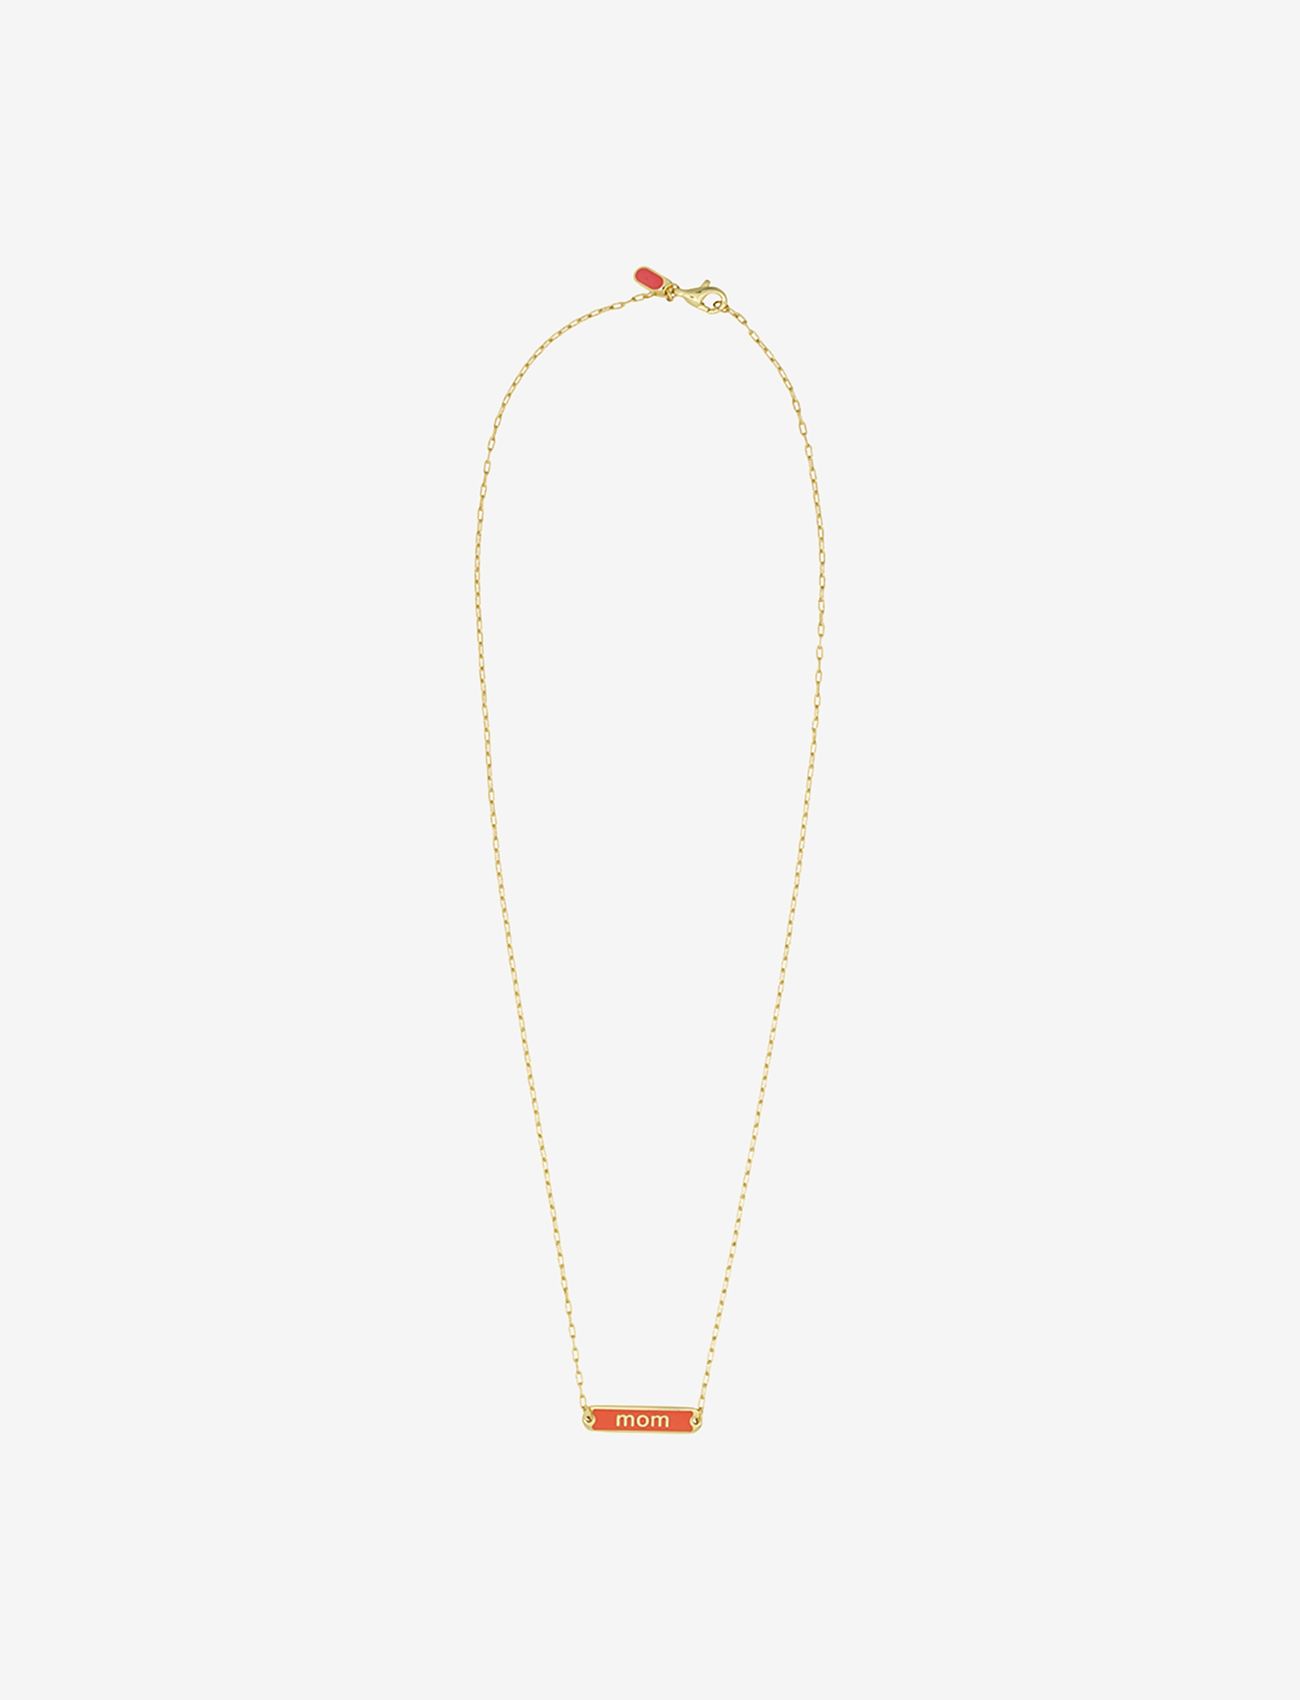 Design Letters - VIP Candy Tag Necklace (Zimula) - festmode zu outlet-preisen - deep sea coral 2032c - 0